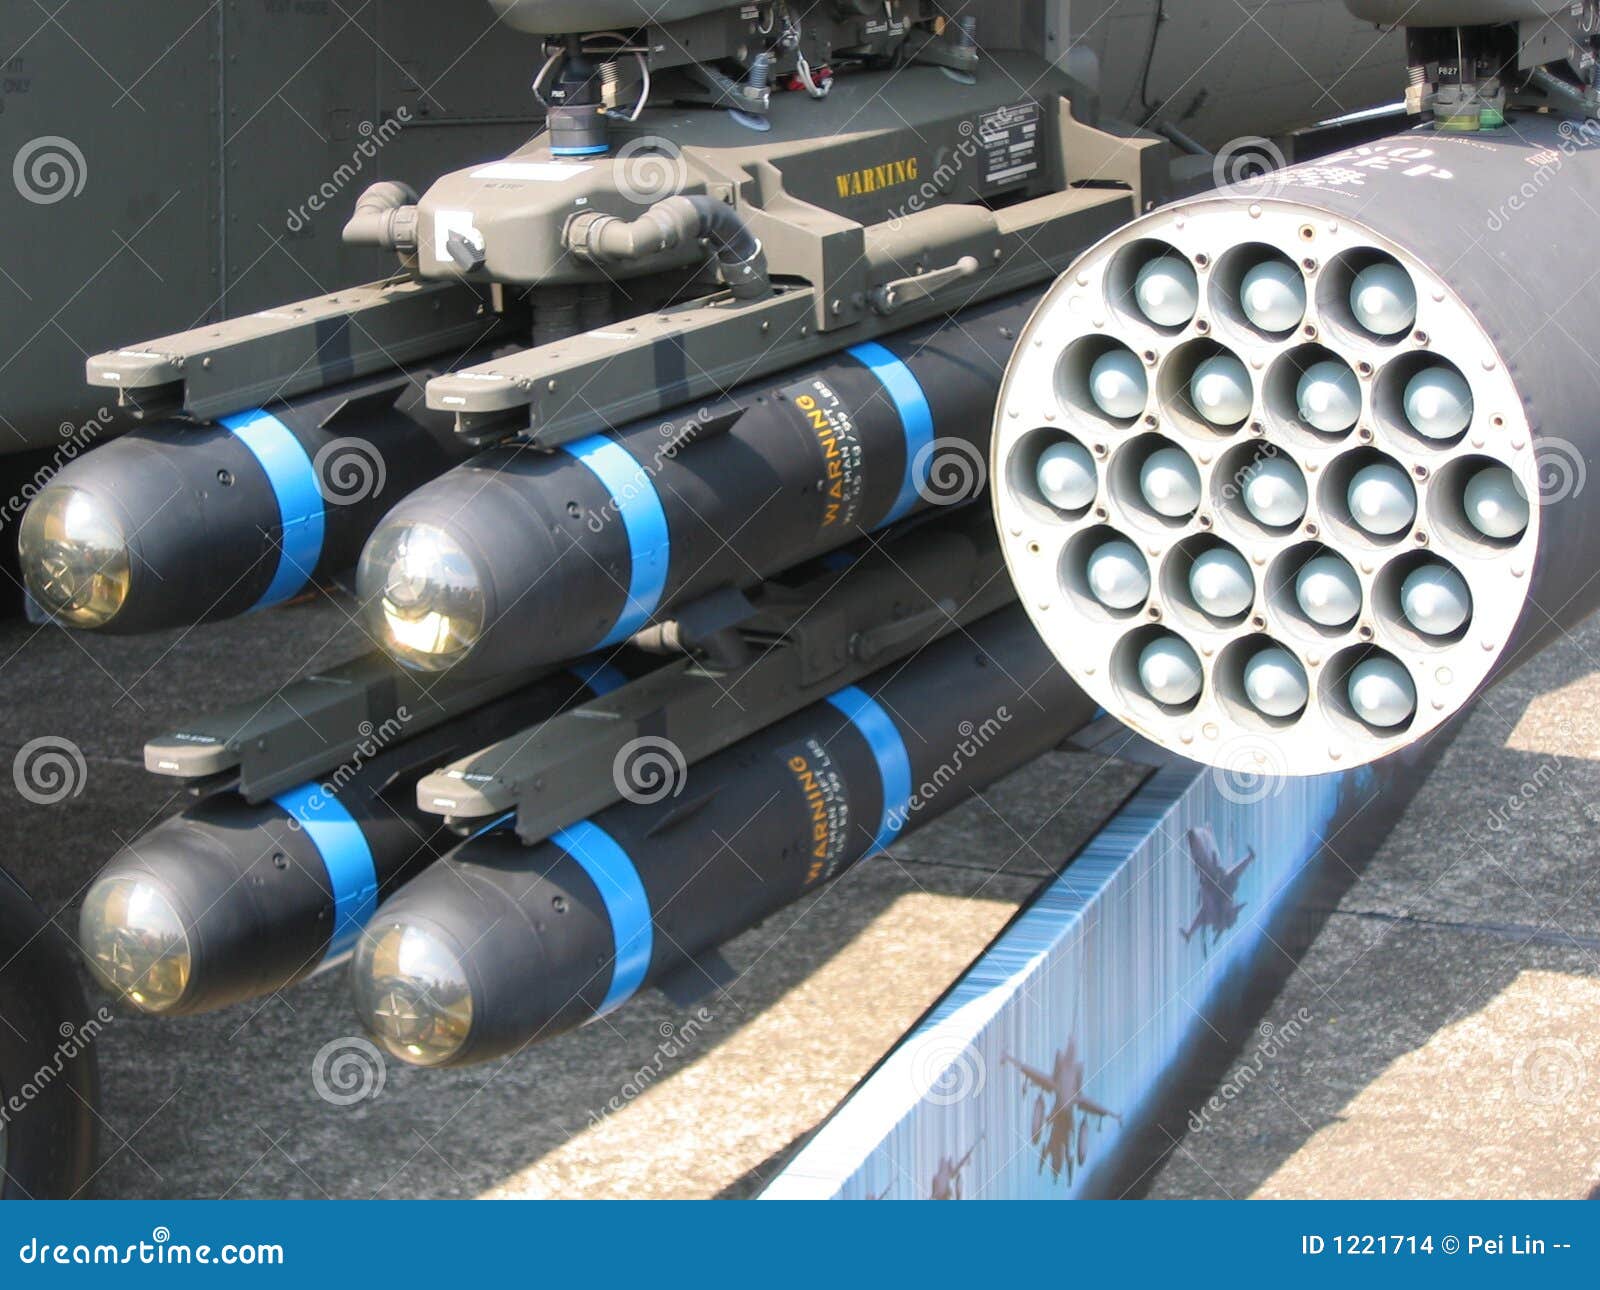 missiles - weapons of mass destruction (wmd)